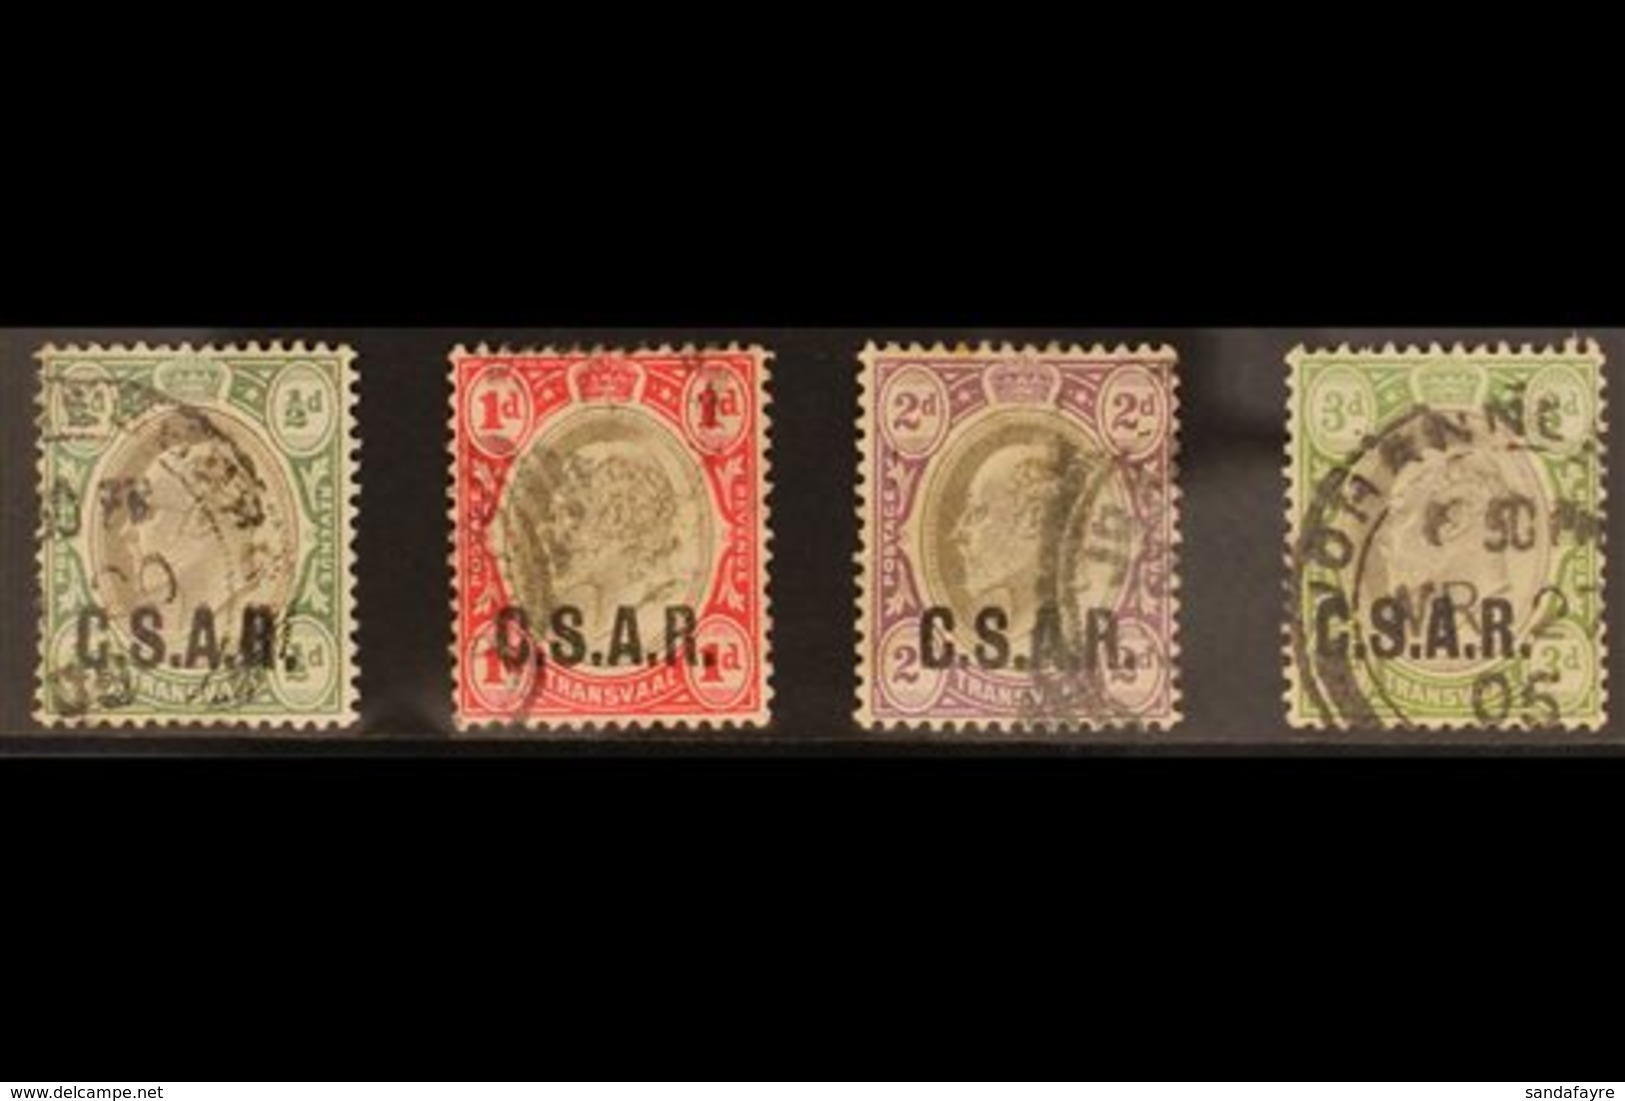 TRANSVAAL RAILWAY OFFICIAL STAMPS 1905 ½d, 1d, 2d, And 3d With "C.S.A.R." Overprints, SG RO3/RO6, Fine Used. (4 Stamps)  - Ohne Zuordnung